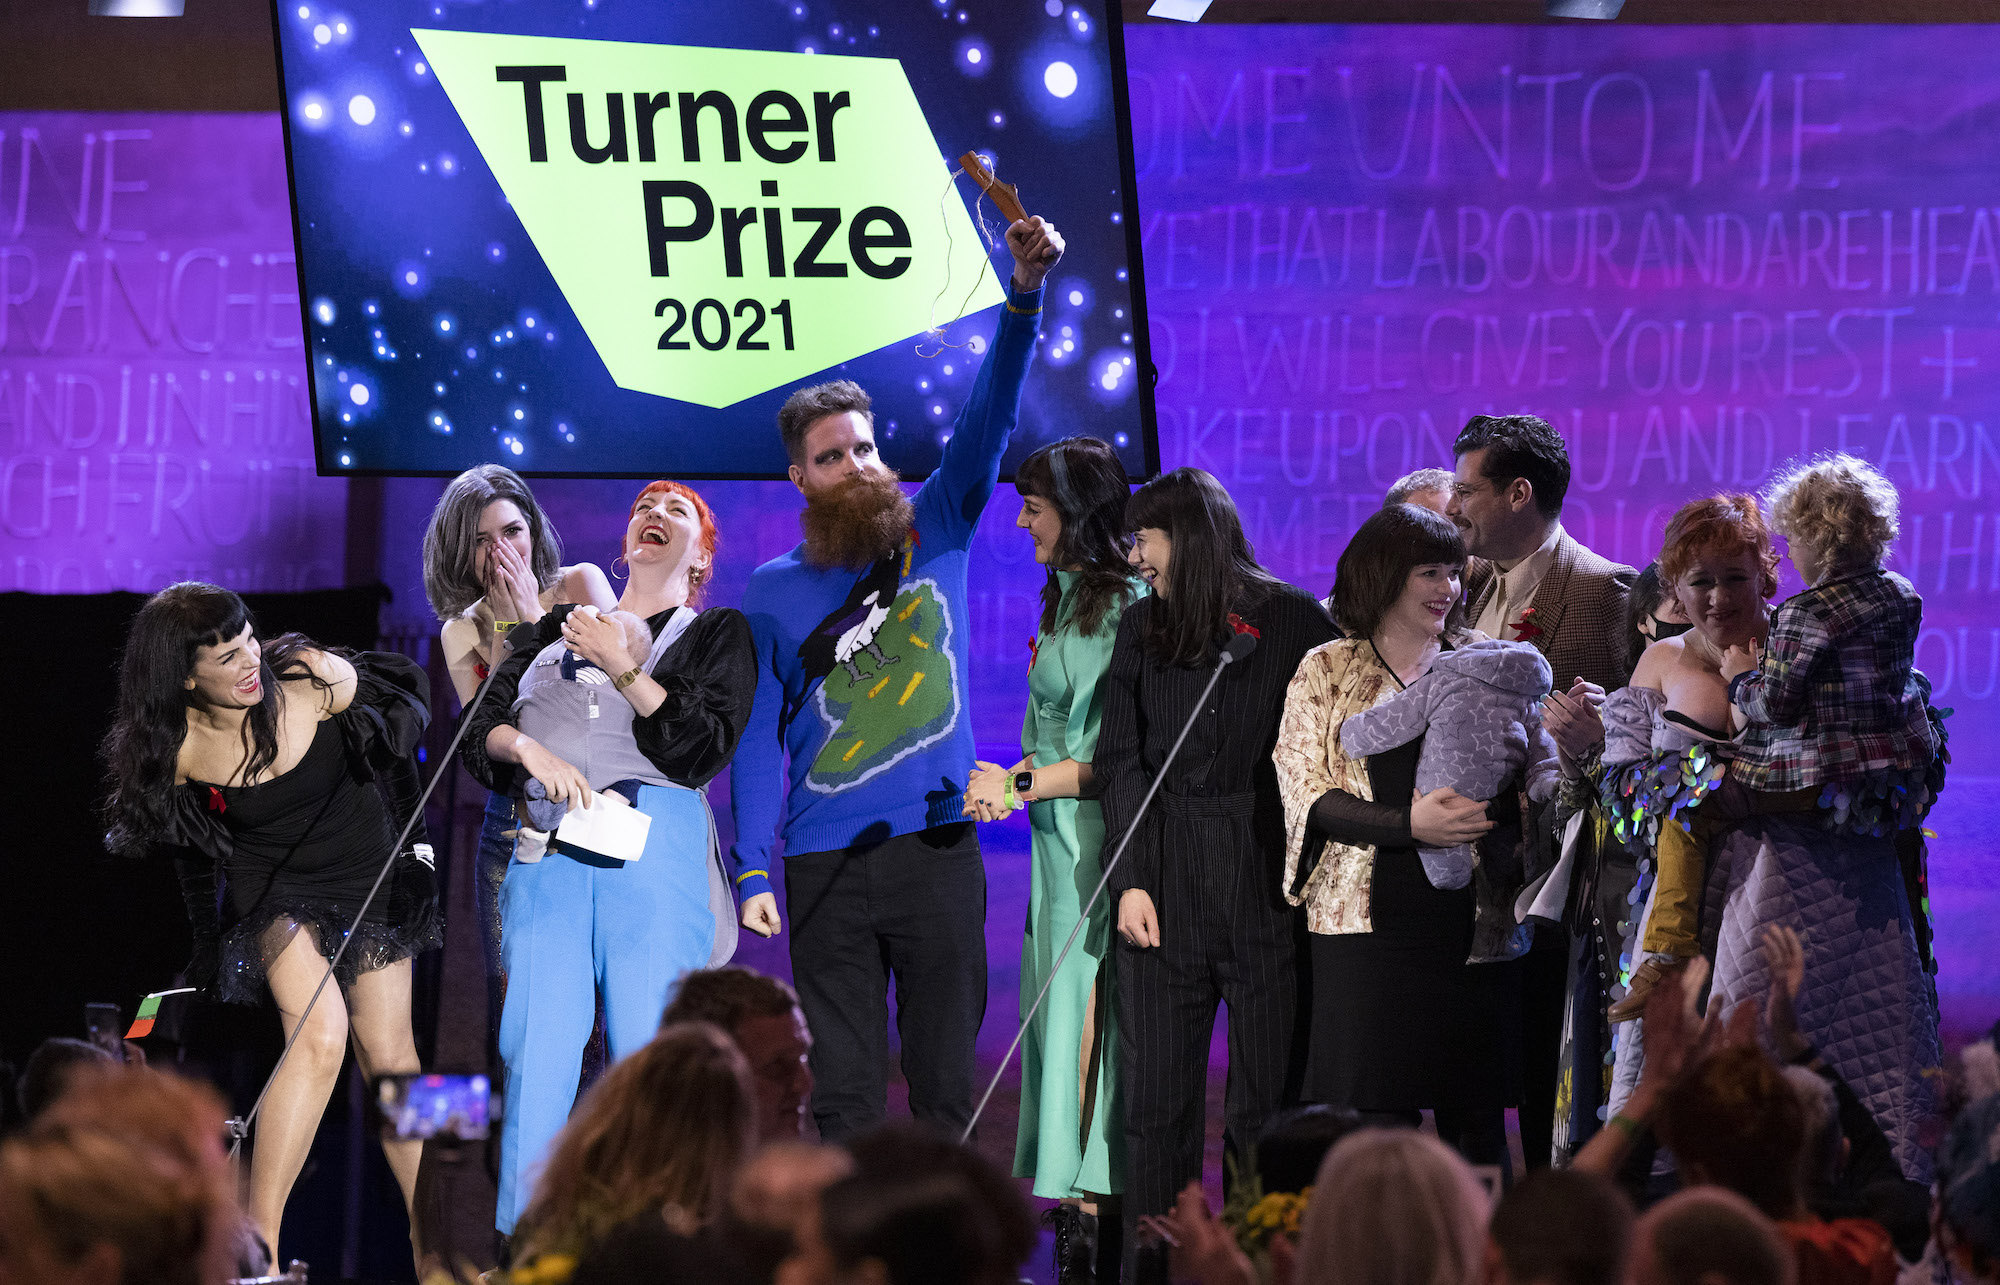 Array Collective are announced as the winner of Turner Prize 2021, the leading international award for contemporary art, at Coventry Cathedral. Photo © Matt Alexander/PA Wire